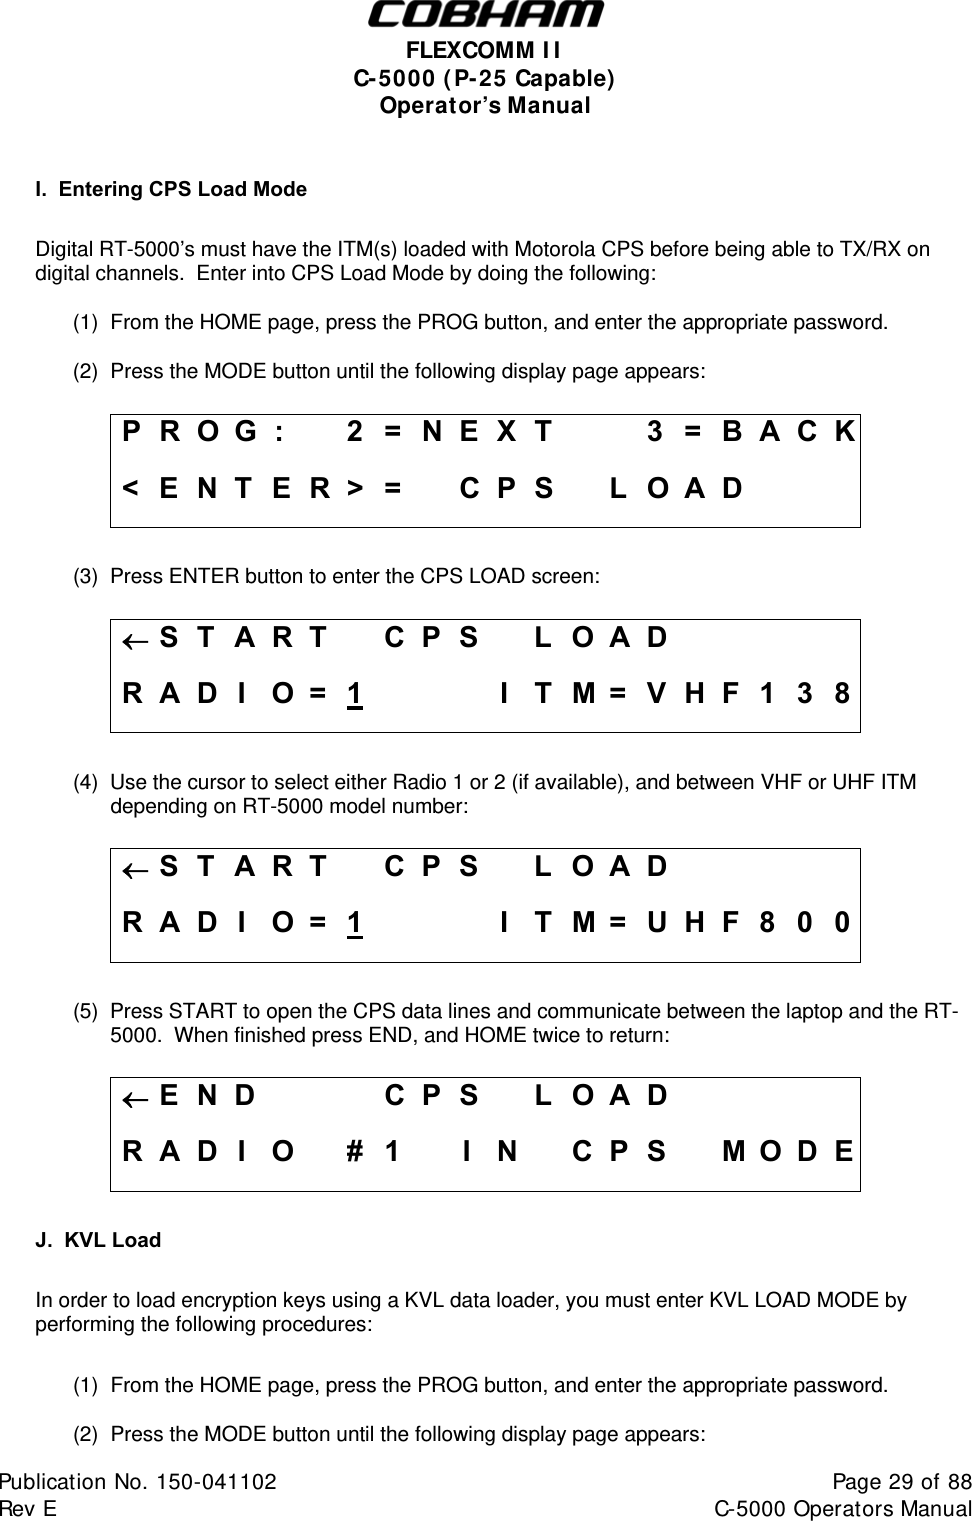  FLEXCOMM I I  C-5000 ( P-25 Capable)  Operator’s Manual  I.  Entering CPS Load Mode  Digital RT-5000’s must have the ITM(s) loaded with Motorola CPS before being able to TX/RX on digital channels.  Enter into CPS Load Mode by doing the following: (1)  From the HOME page, press the PROG button, and enter the appropriate password. (2)  Press the MODE button until the following display page appears:  P R O G :    2 = N E X T     3 = B A C K &lt; E N T E R &gt; =   C P S   L O A D        (3)  Press ENTER button to enter the CPS LOAD screen:  S T A R T  C P S  L O A D      R A D I  O =  1    I T M = V H F 1 3 8  (4)  Use the cursor to select either Radio 1 or 2 (if available), and between VHF or UHF ITM             depending on RT-5000 model number:  S T A R T  C P S  L O A D      R A D I  O =  1    I T M = U H F 8 0 0  (5)  Press START to open the CPS data lines and communicate between the laptop and the RT-5000.  When finished press END, and HOME twice to return:  E N D    CPS LOAD     R A D I O  # 1   I N  C P S  M O D E  J.  KVL Load  In order to load encryption keys using a KVL data loader, you must enter KVL LOAD MODE by performing the following procedures:  (1)  From the HOME page, press the PROG button, and enter the appropriate password. (2)  Press the MODE button until the following display page appears: Publication No. 150-041102  Page 29 of 88  Rev E  C-5000 Operators Manual    